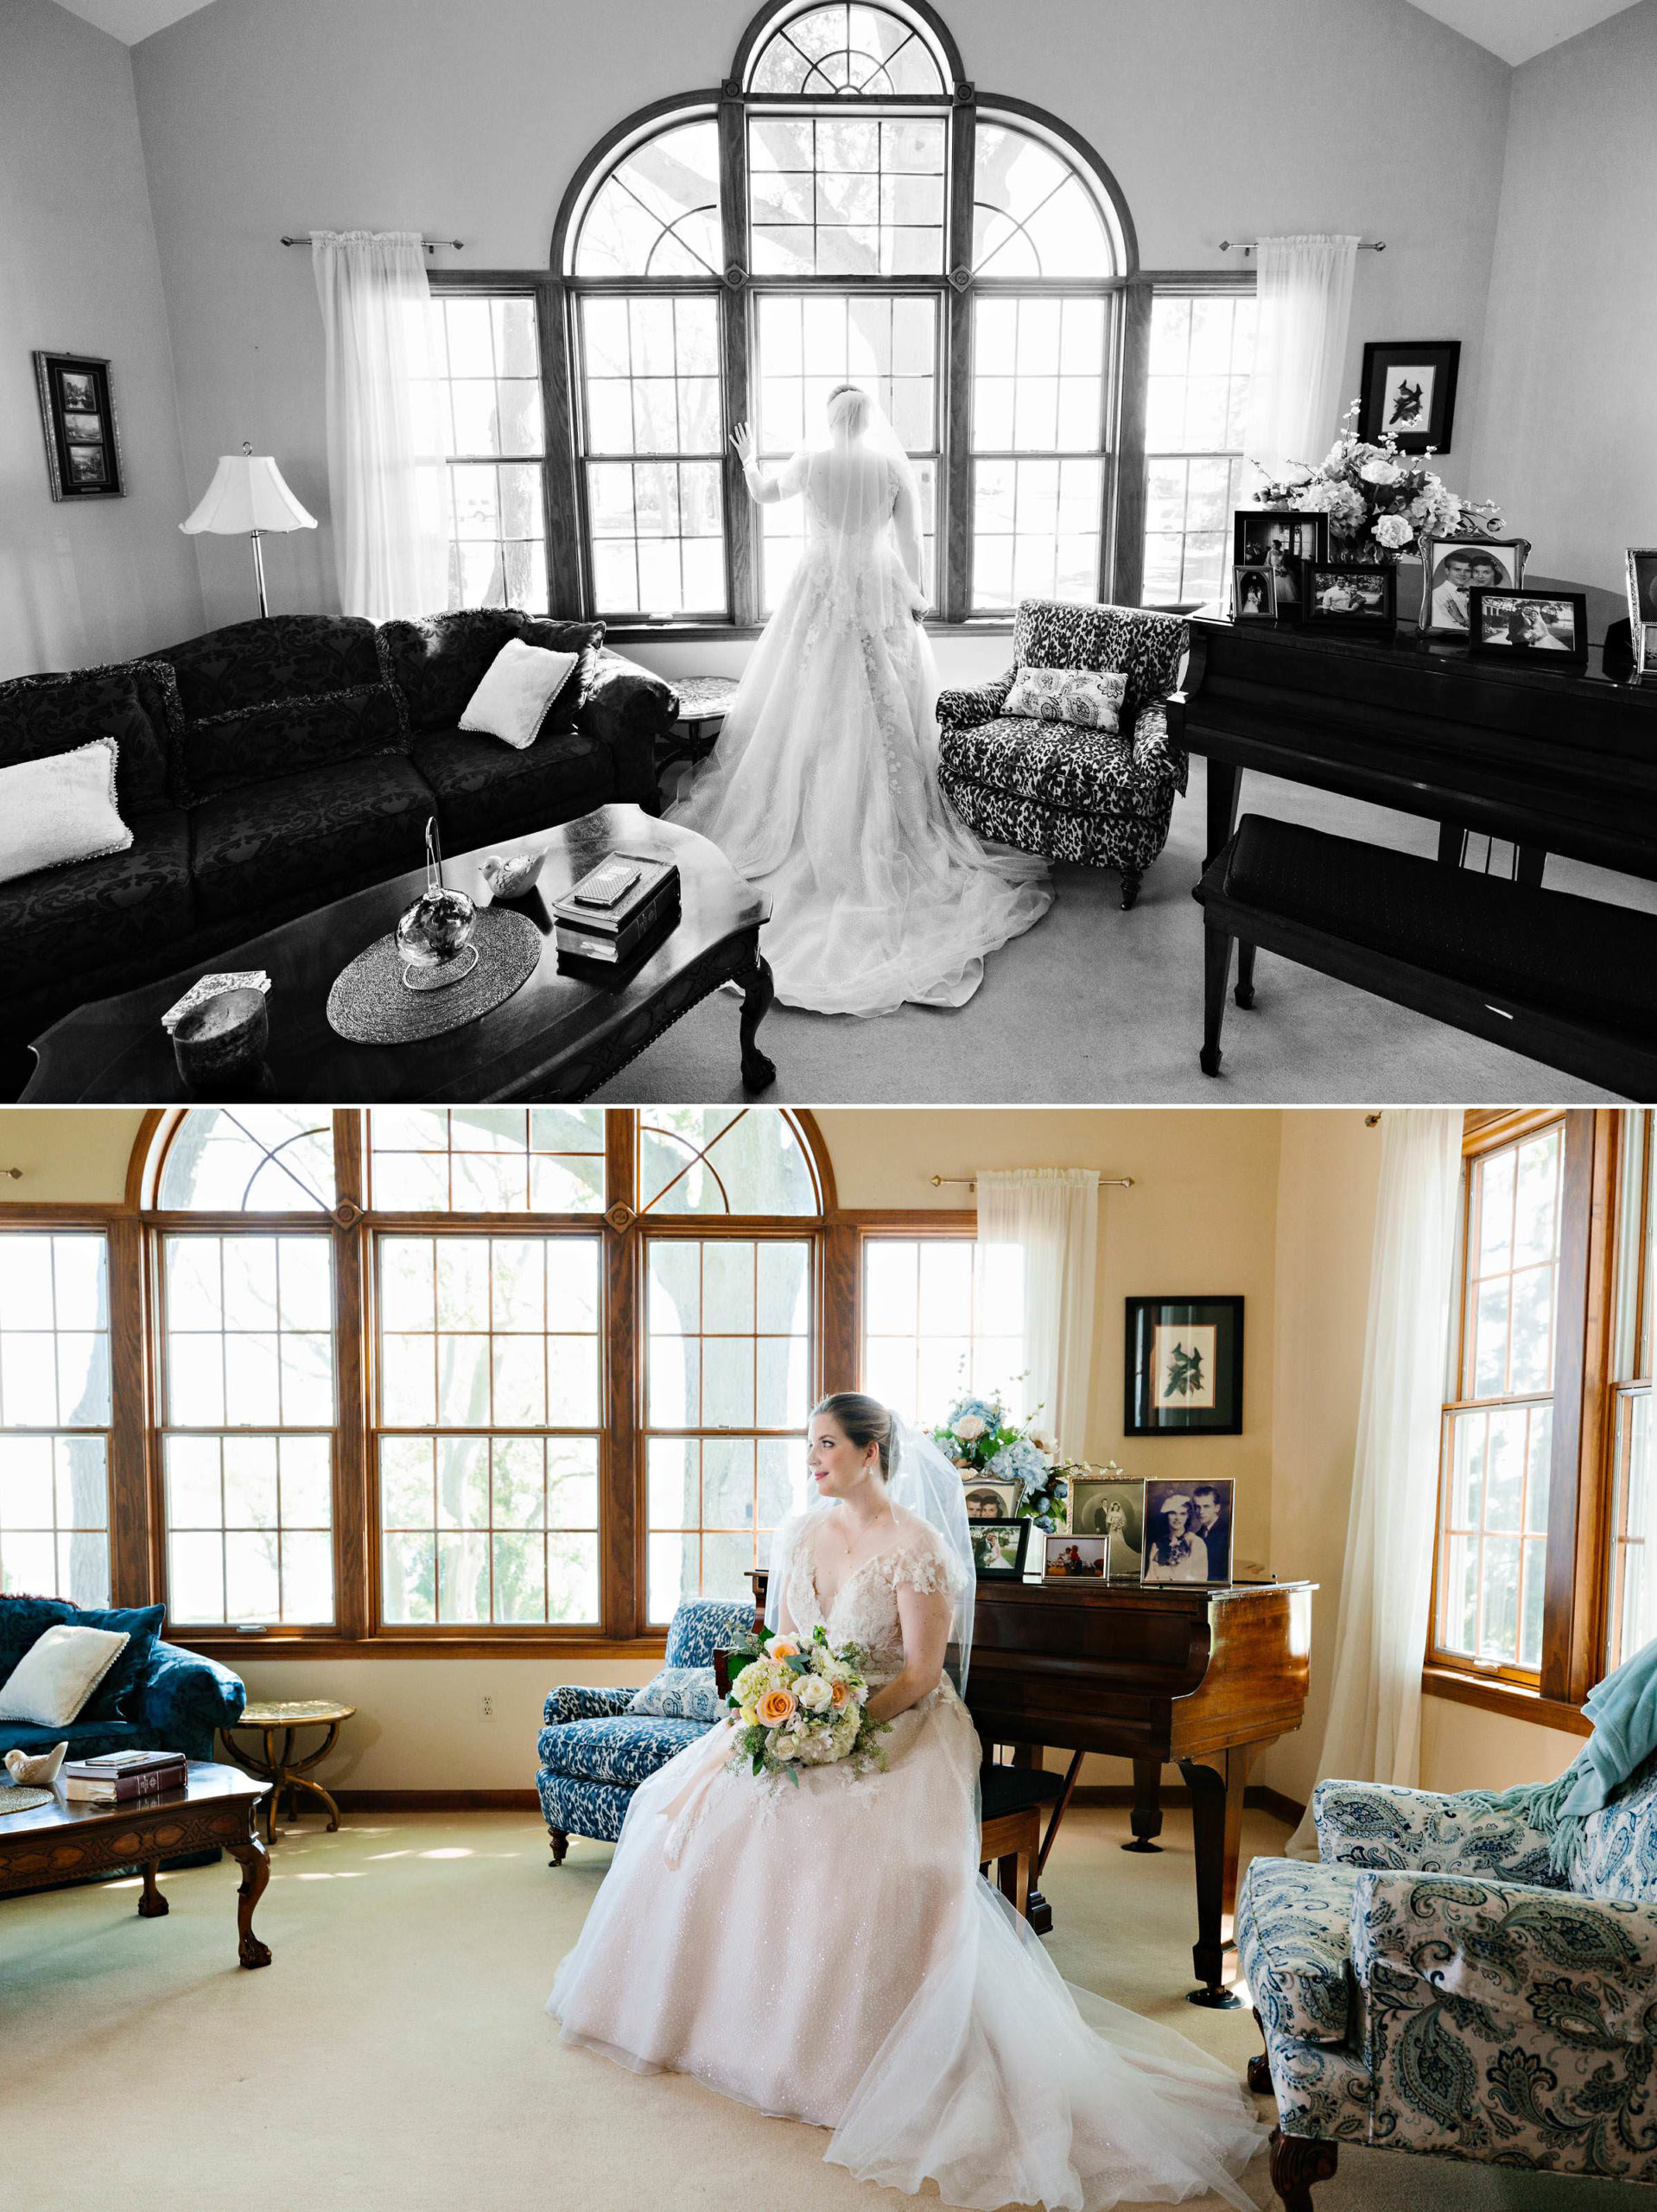 Black and white photo of bride from behind looking out of window after getting ready; bride sits and holds flower bouquet by Detroit Wedding Photographer Michele Maloney